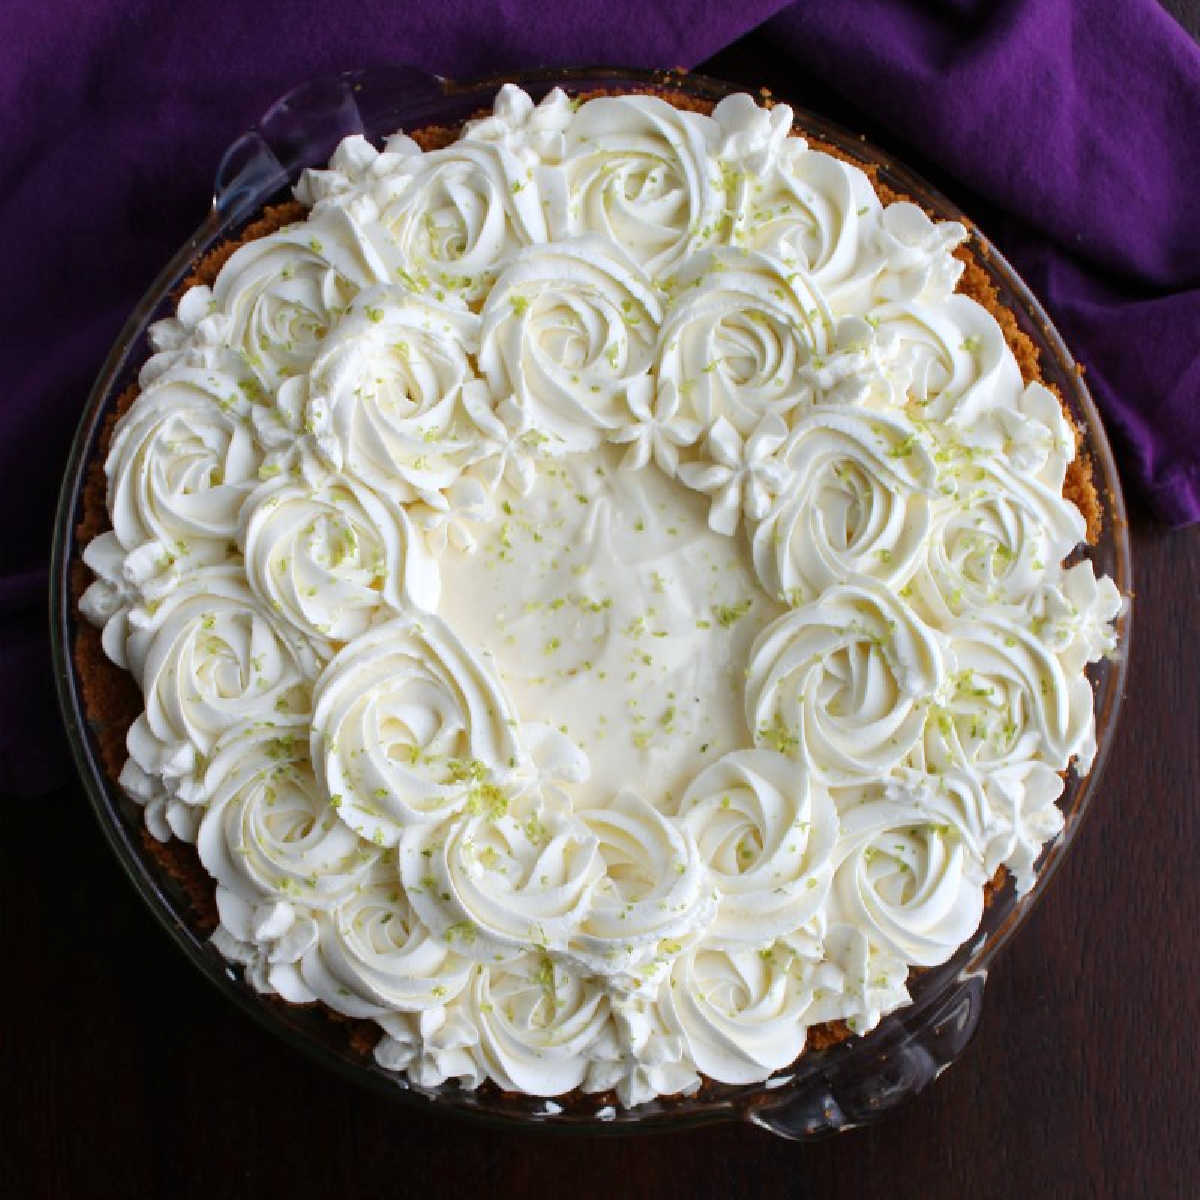 whole key lime pie with whipped cream rosettes and flowers on top.